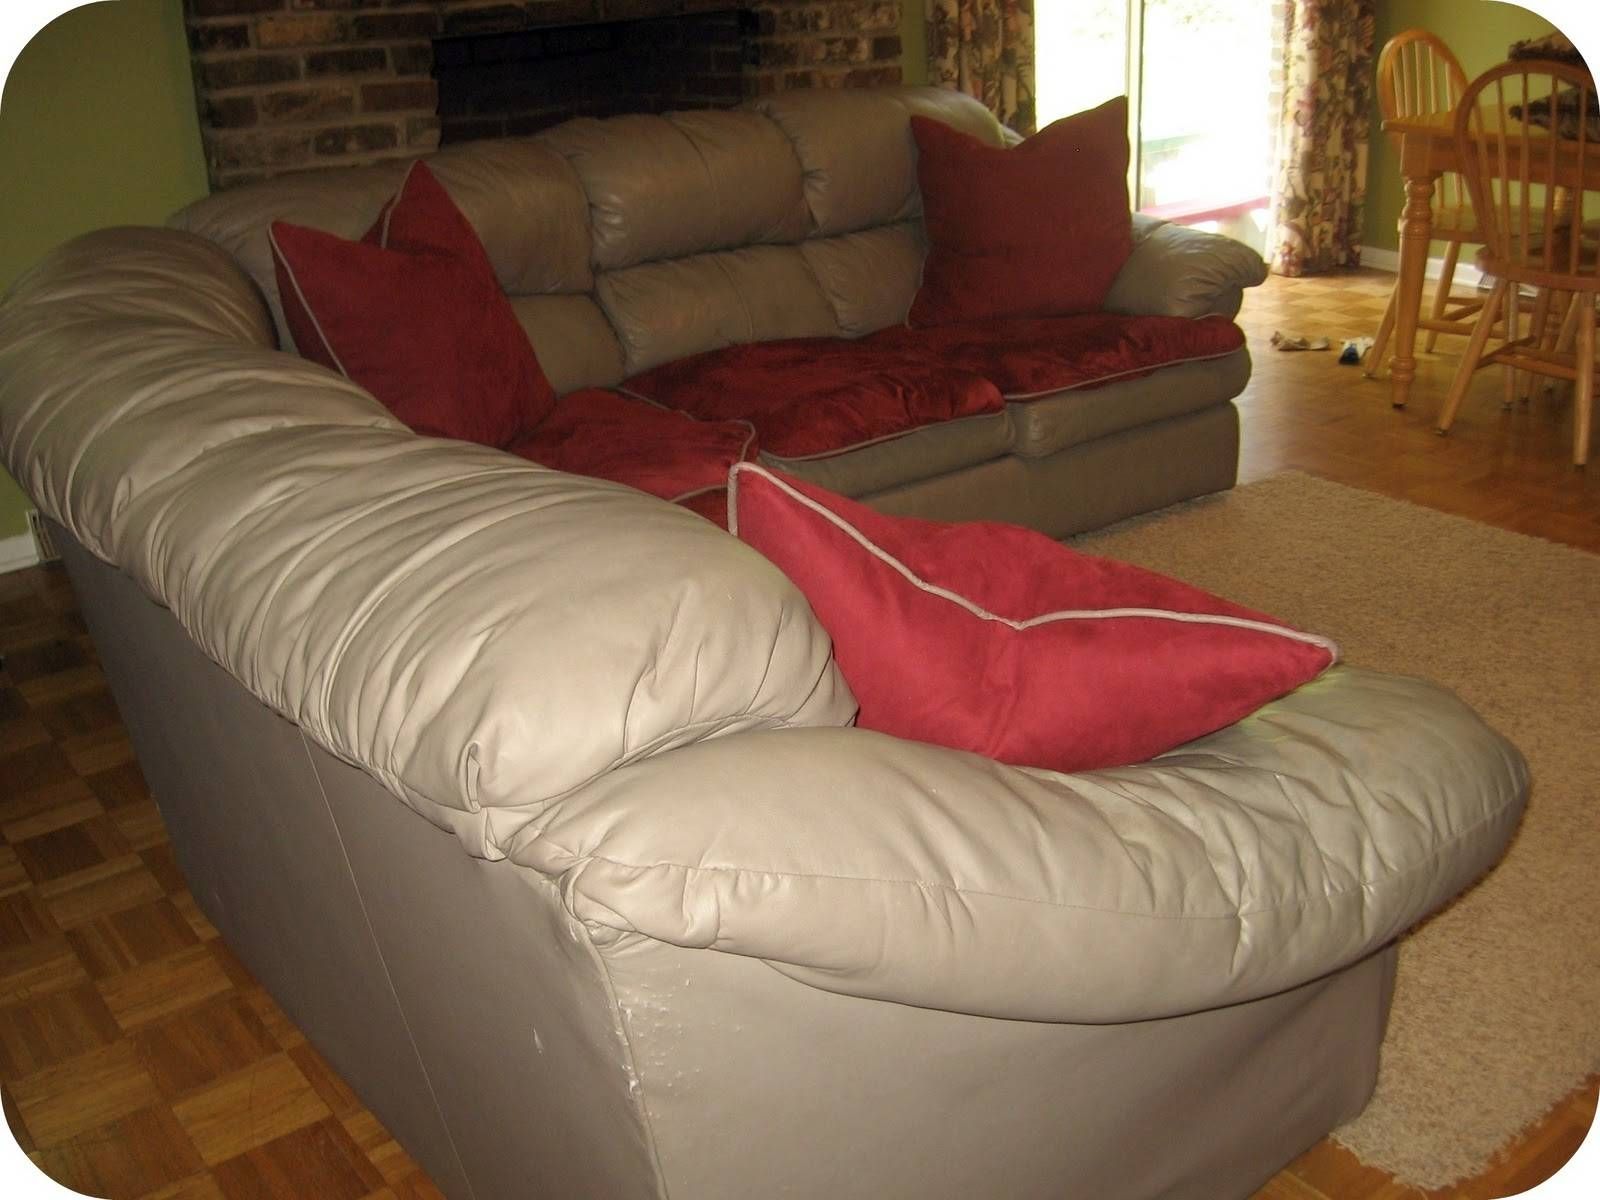 Furniture: Walmart Sofa Covers | Couch Cover Walmart | Slipcovers With Regard To Slipcovers For Sectional Sofas With Recliners (View 11 of 30)